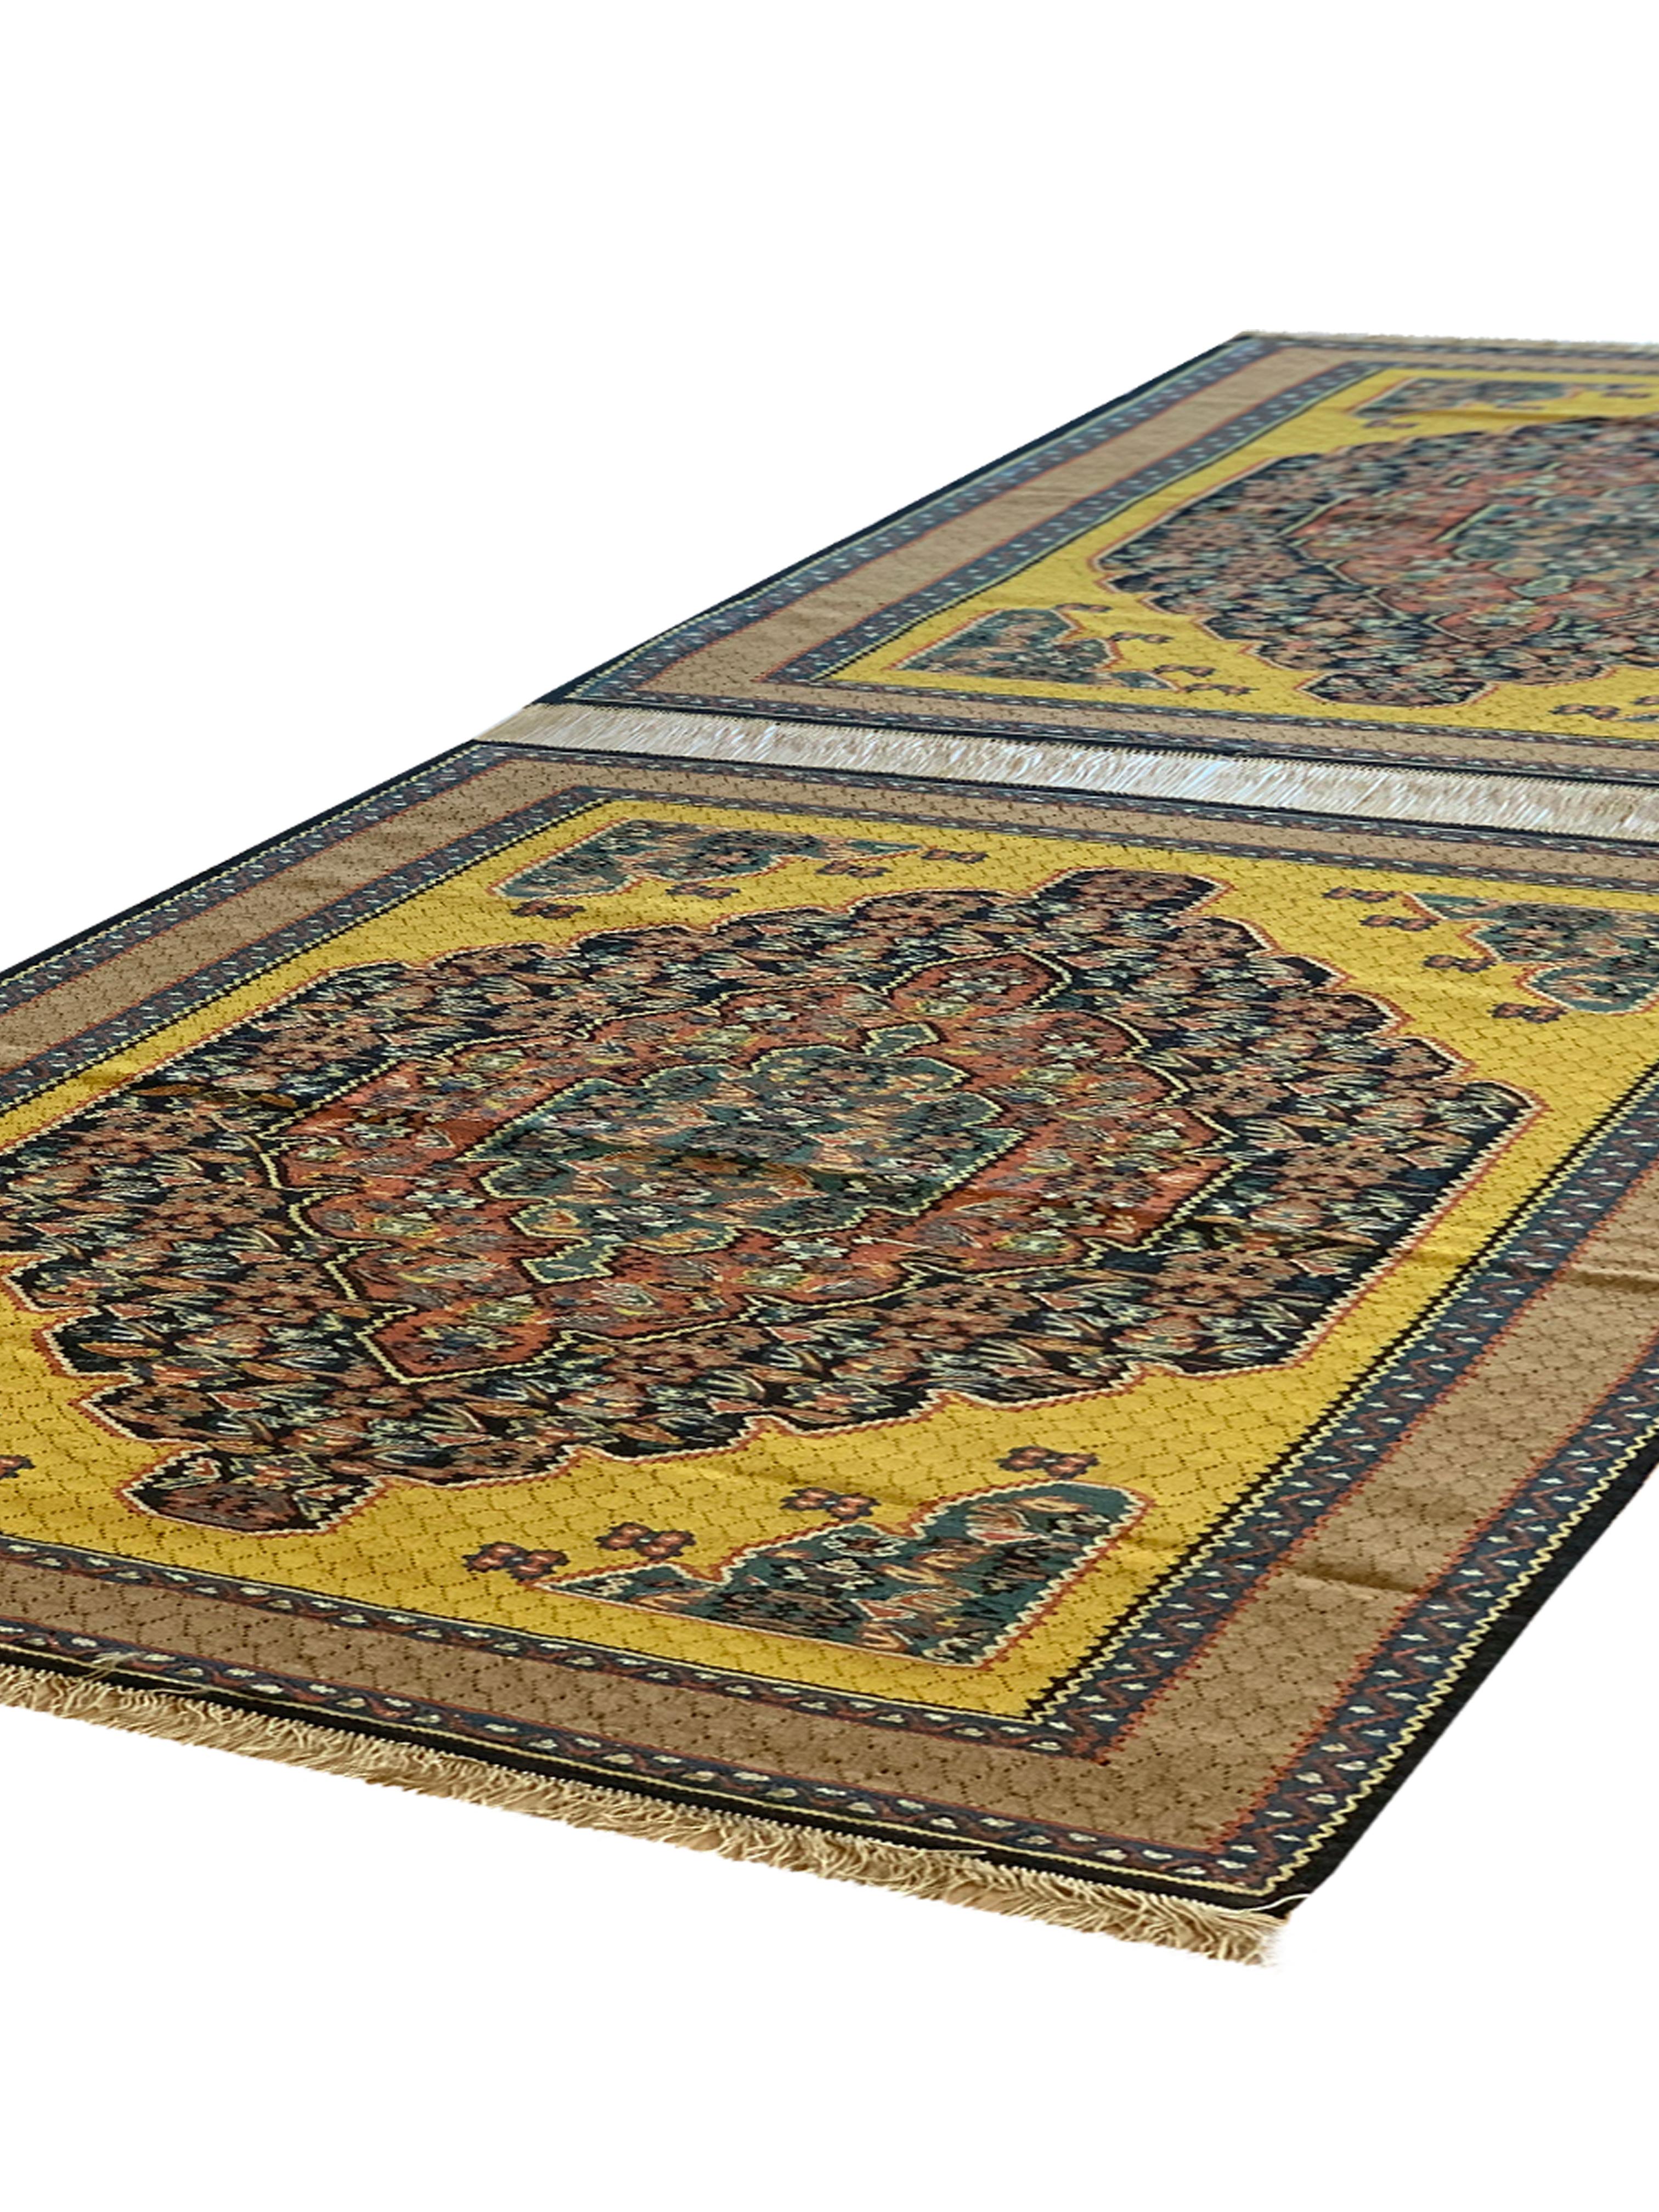 Pair of Kilim Rugs Traditional Carpet Flatwoven Yellow Silk/Wool Rugs For Sale 5